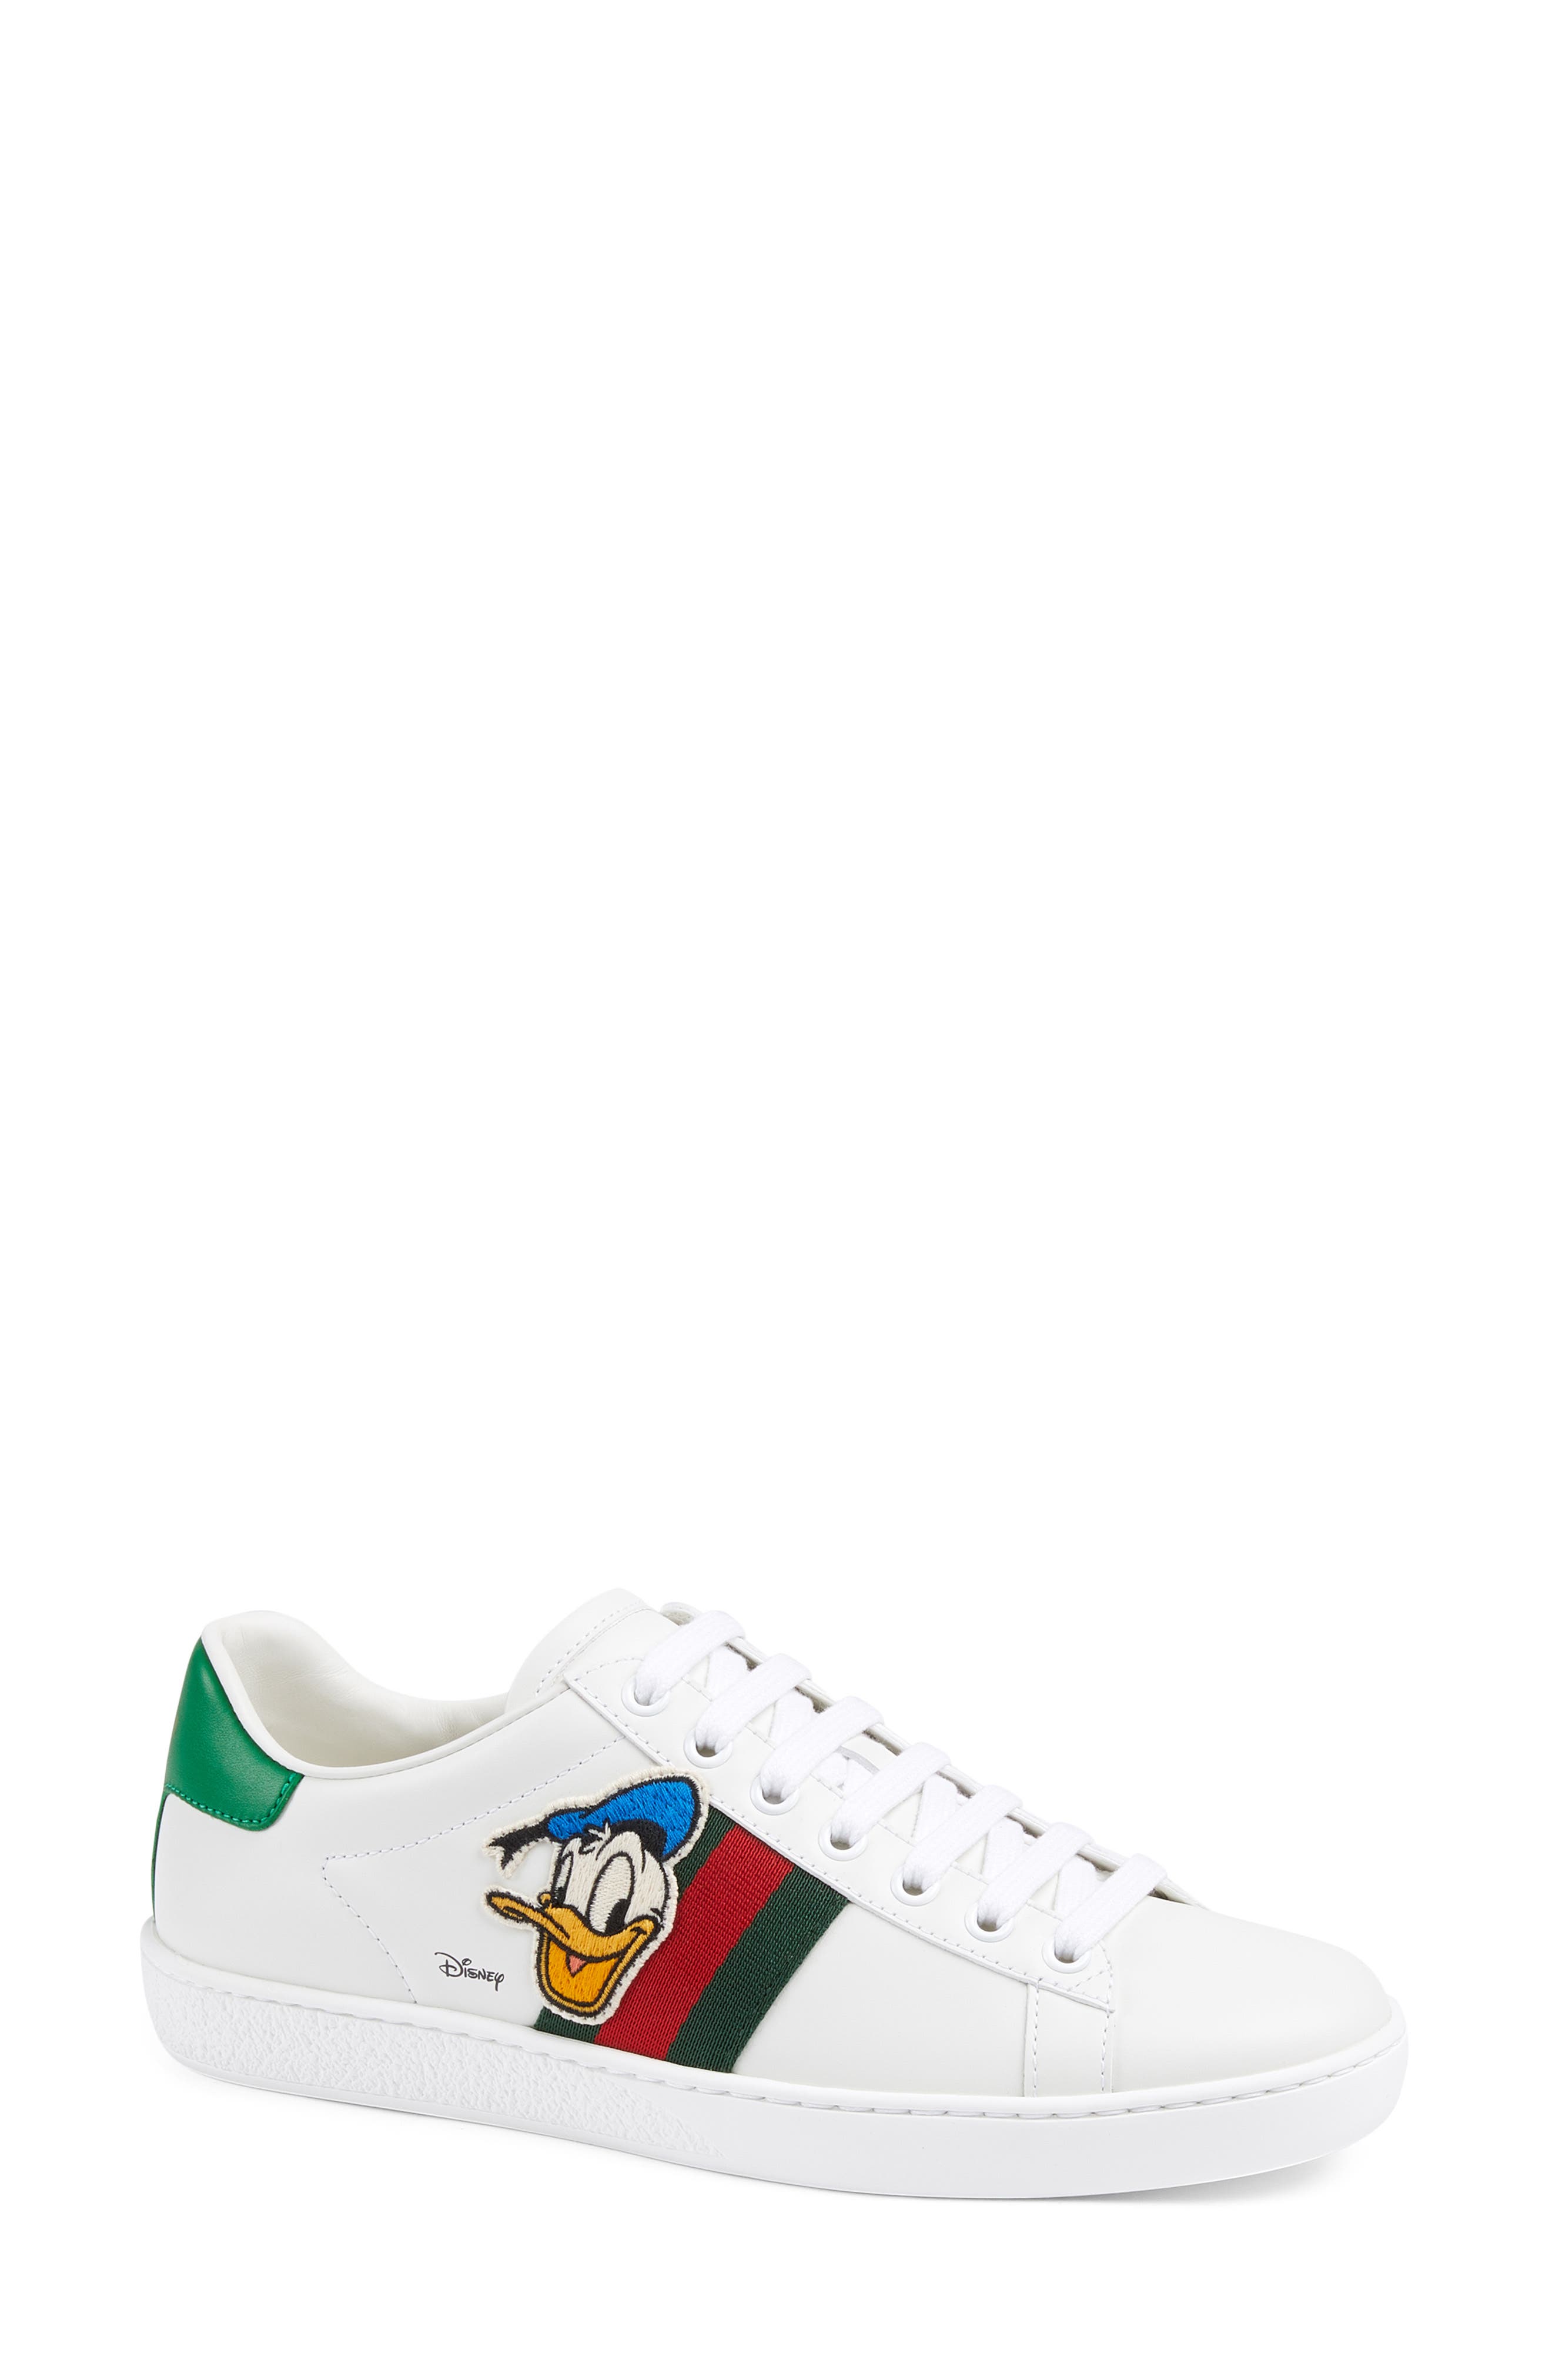 gucci ace sneakers nordstrom